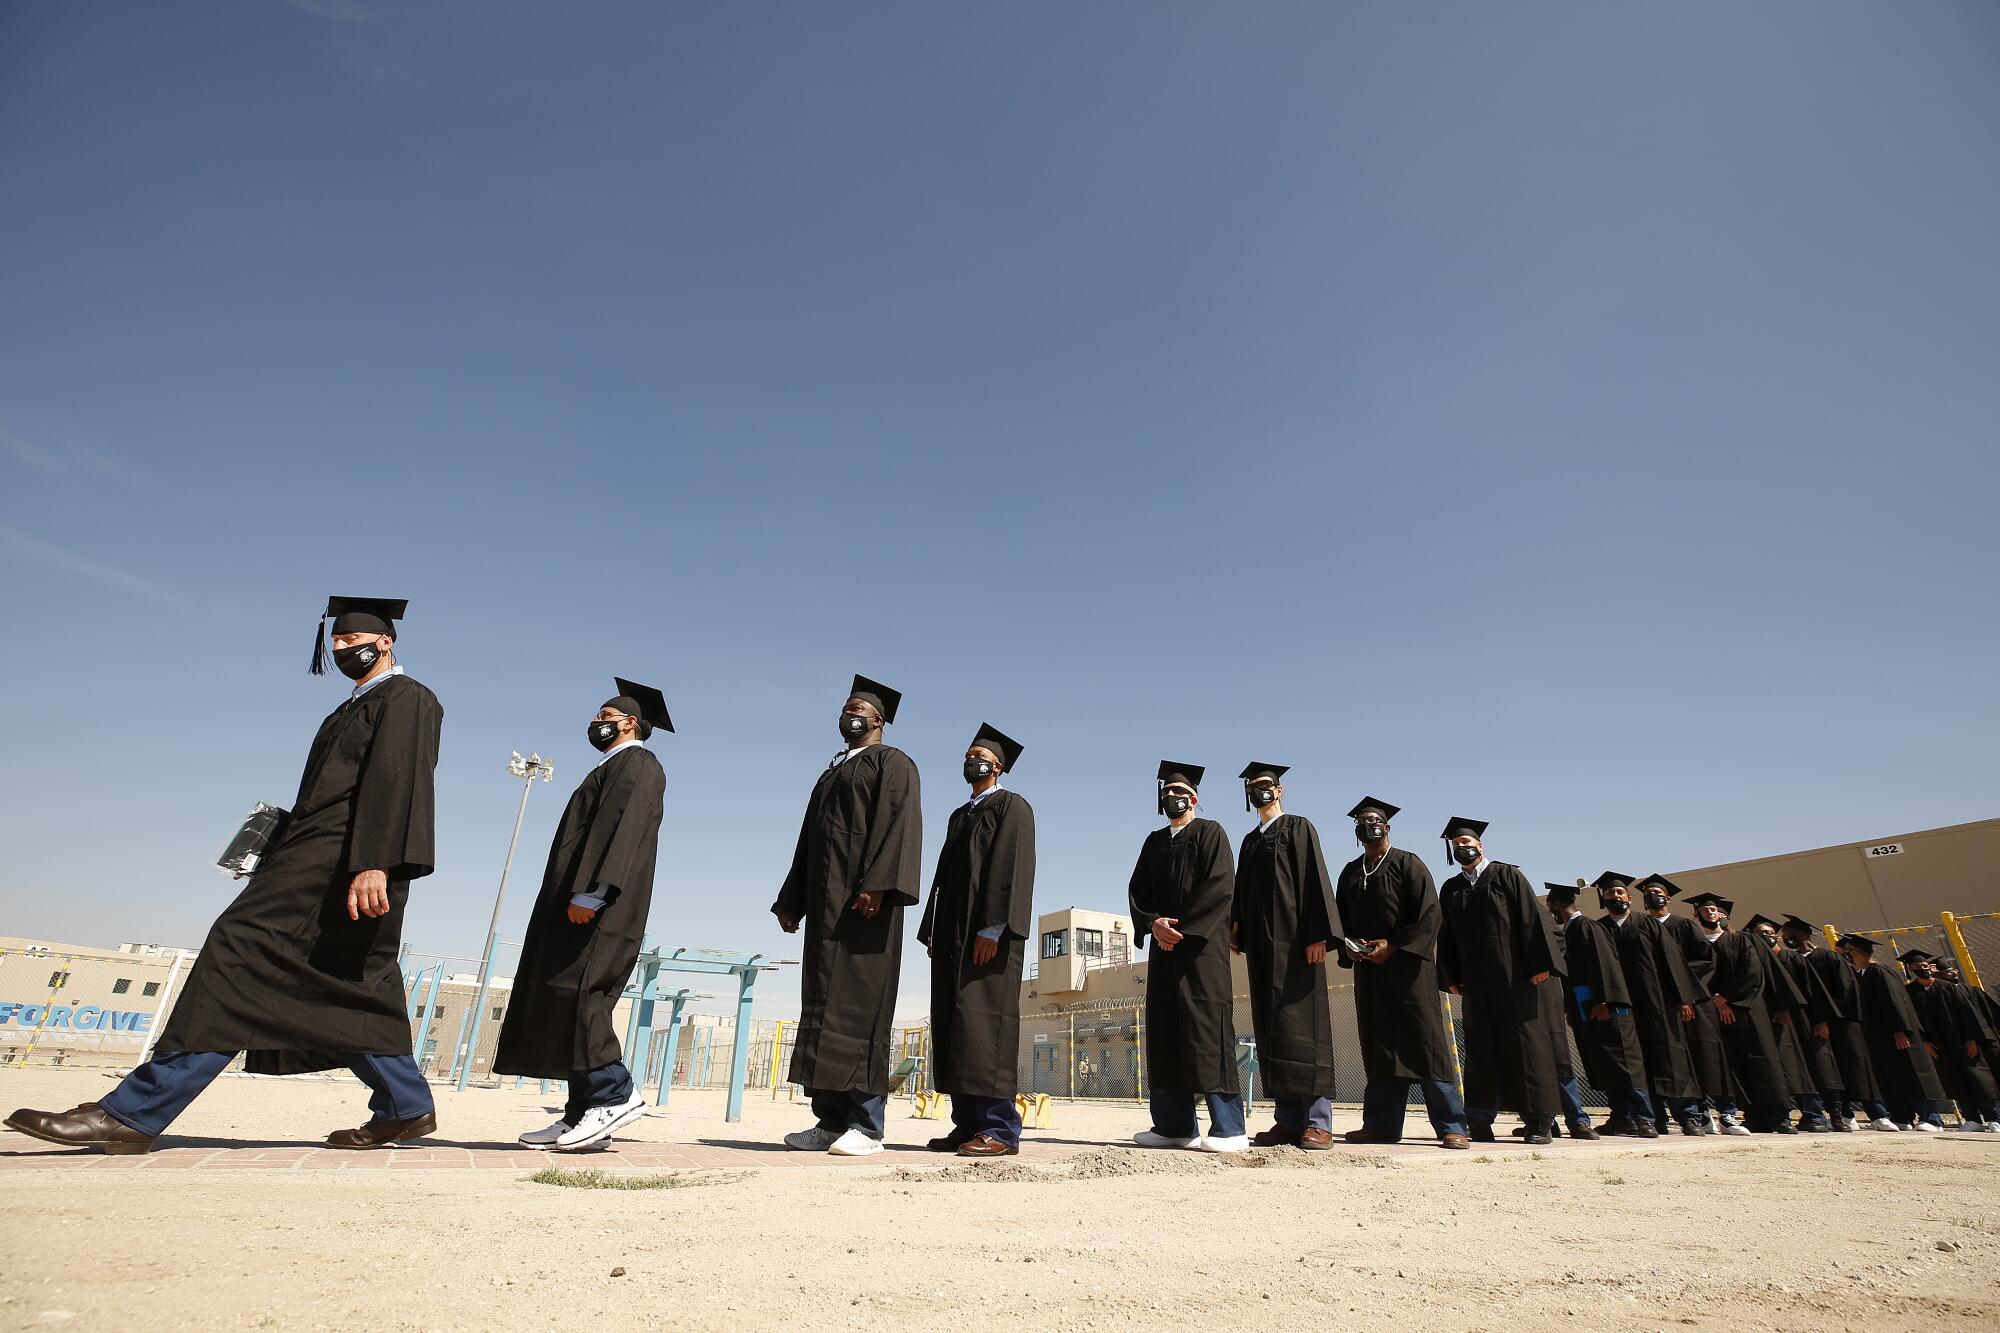 Men wearing graduation robs and hats walk in a prison yard